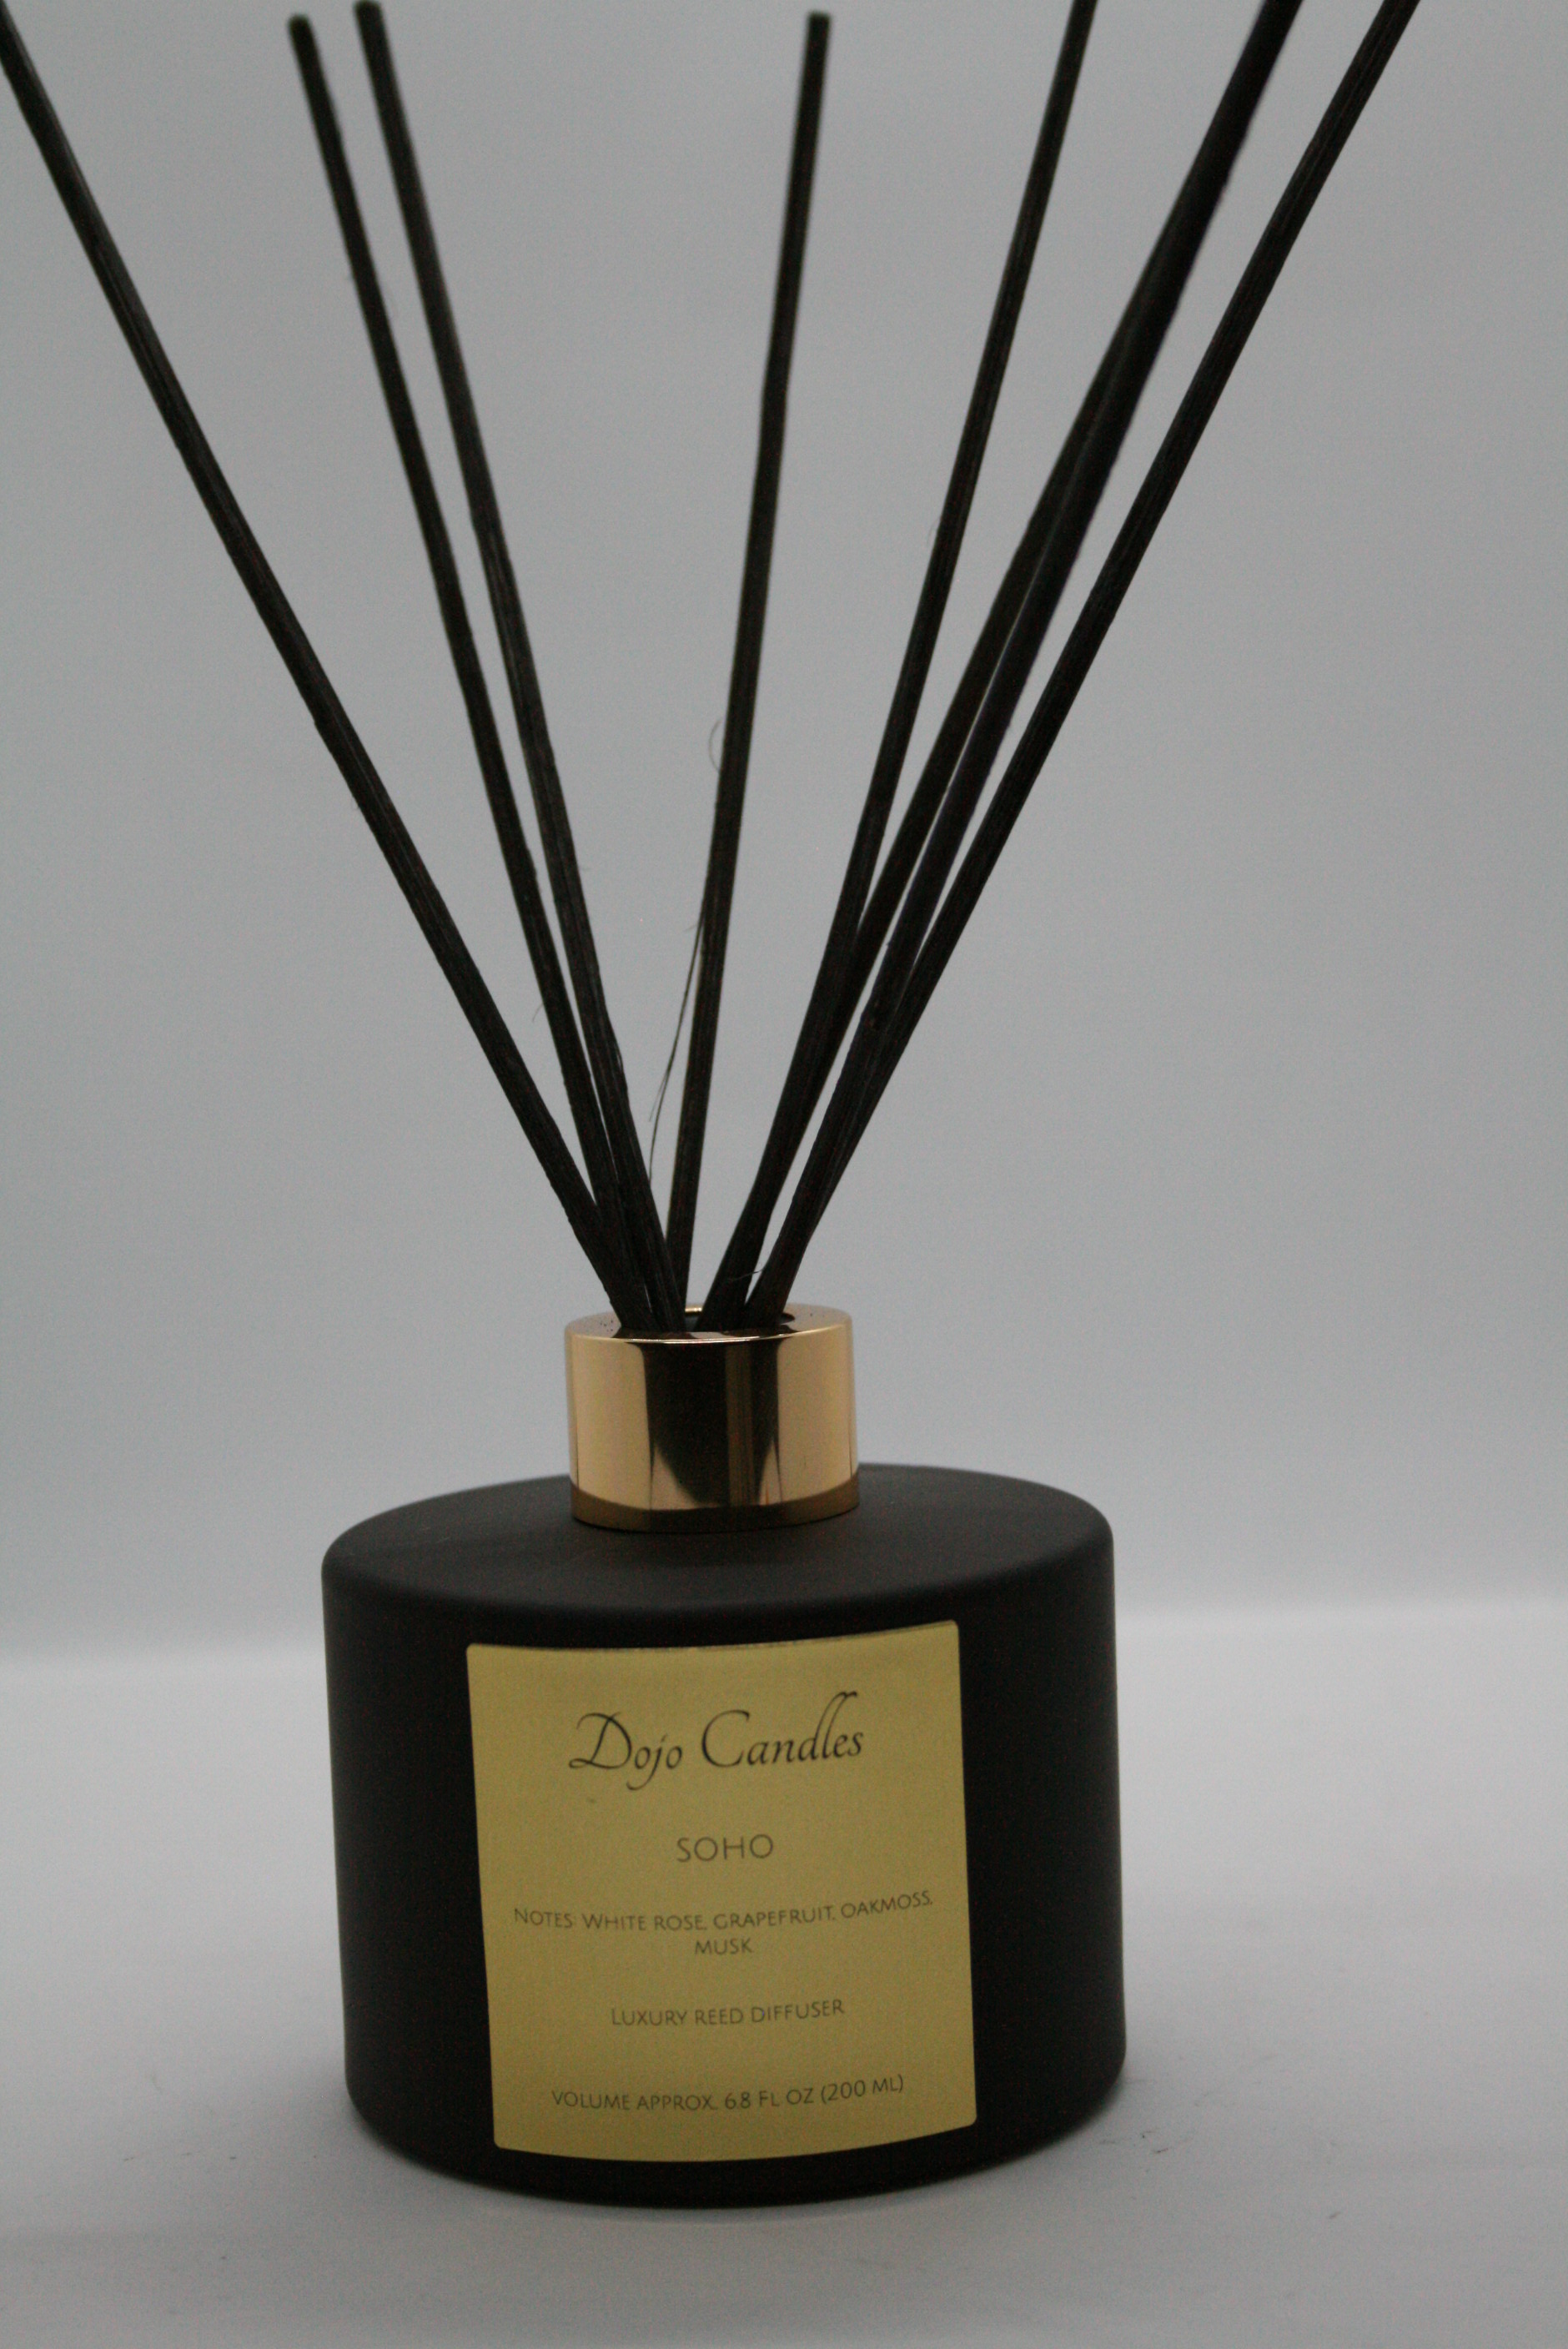 Soho (Baies Diptyque Dupe) Luxury Diffuser